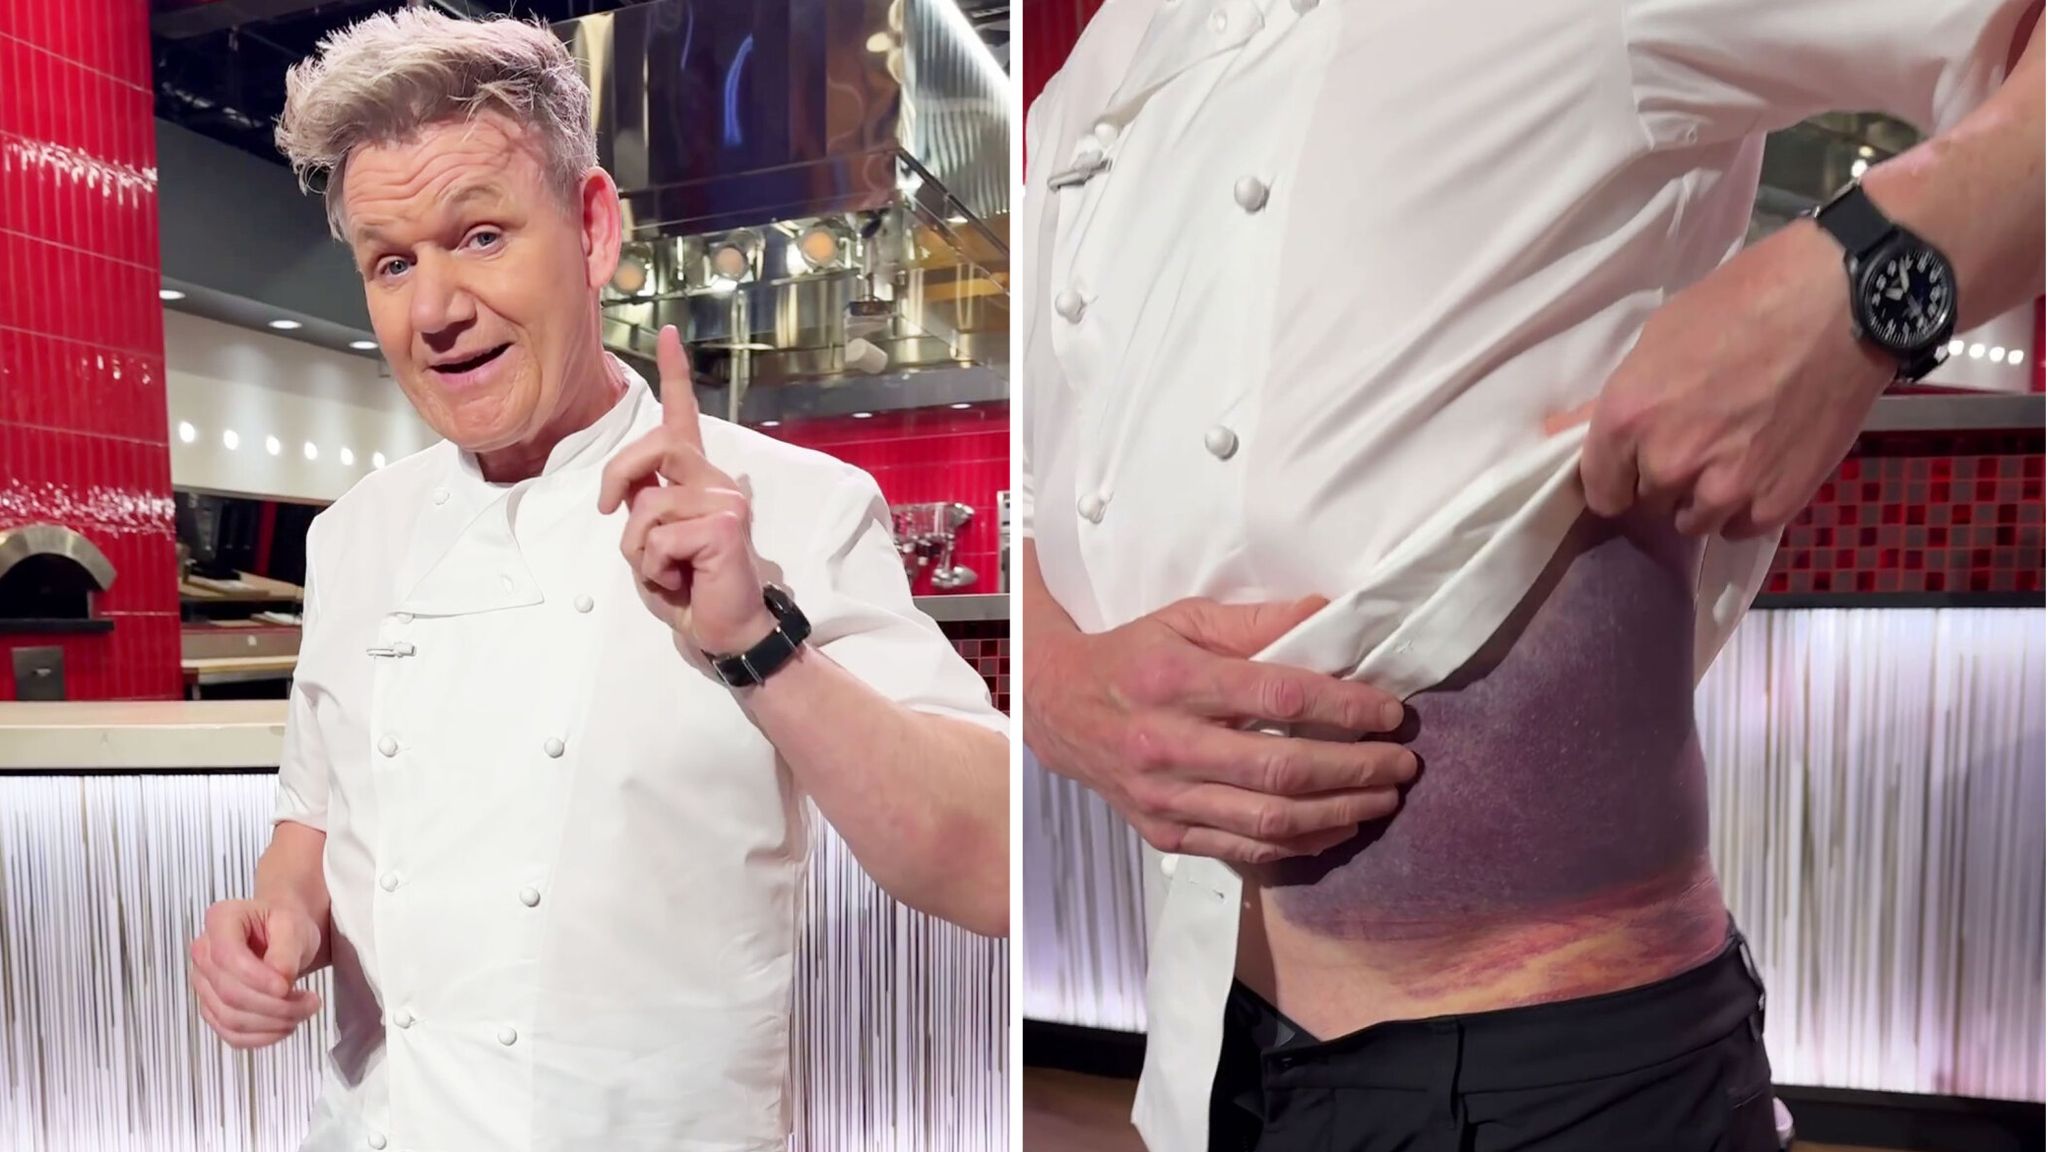 Gordon Ramsay says he's 'lucky to be alive' after bike accident - and thanks  his helmet | Ents & Arts News | Sky News